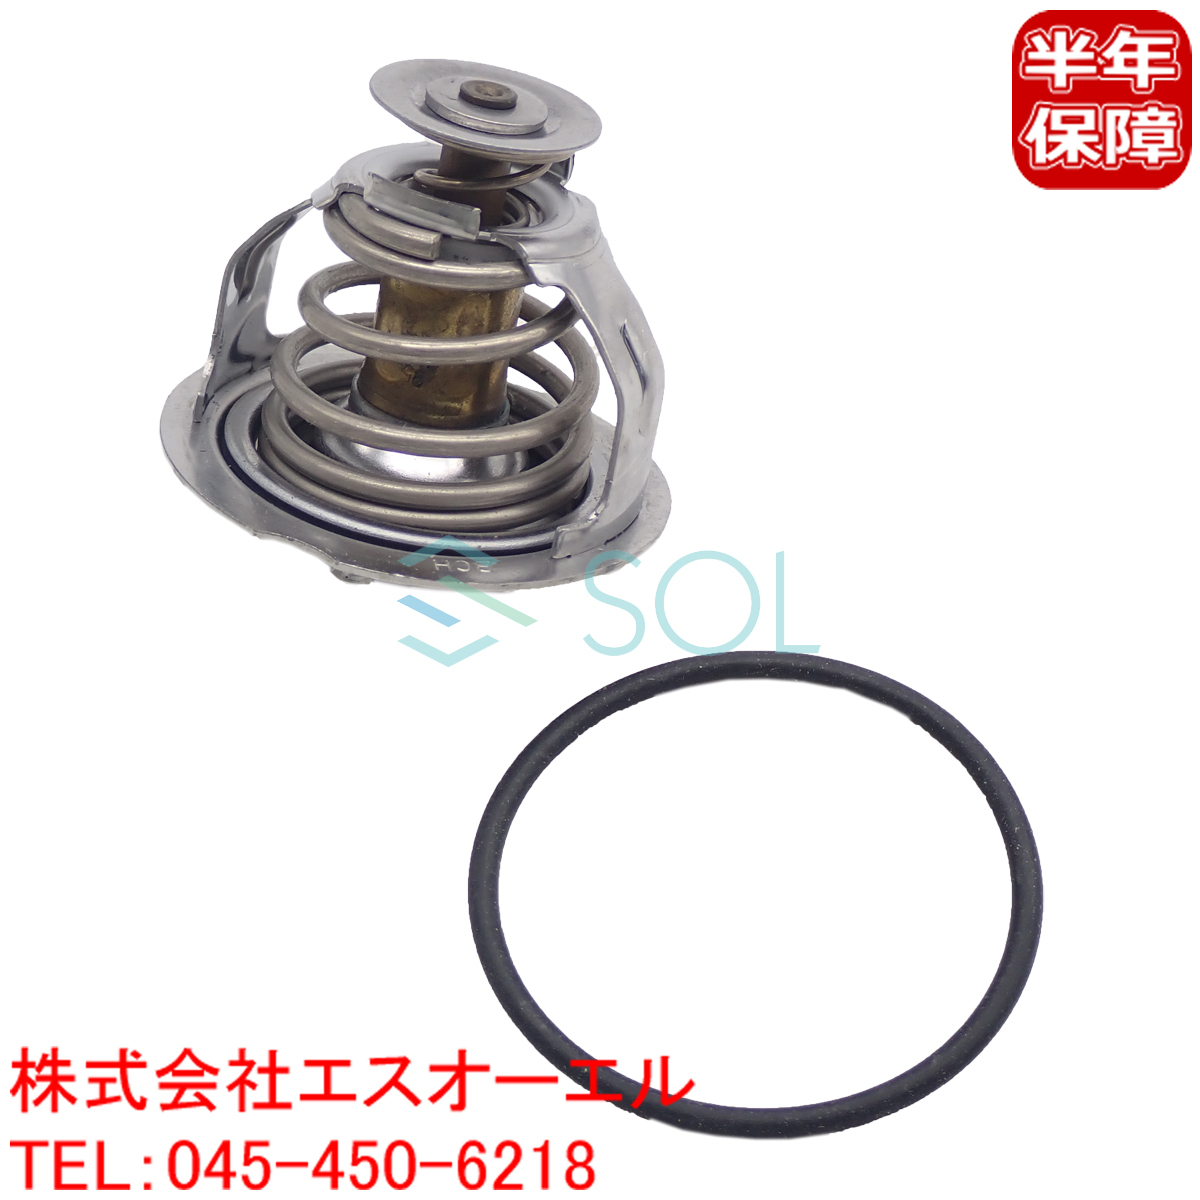  Audi A6(4G2 4GC 4G5 4GD) Q5(8RB) TT(8J3 8J9) thermostat gasket attaching 95*C.. type 06J121113A shipping deadline 18 hour 